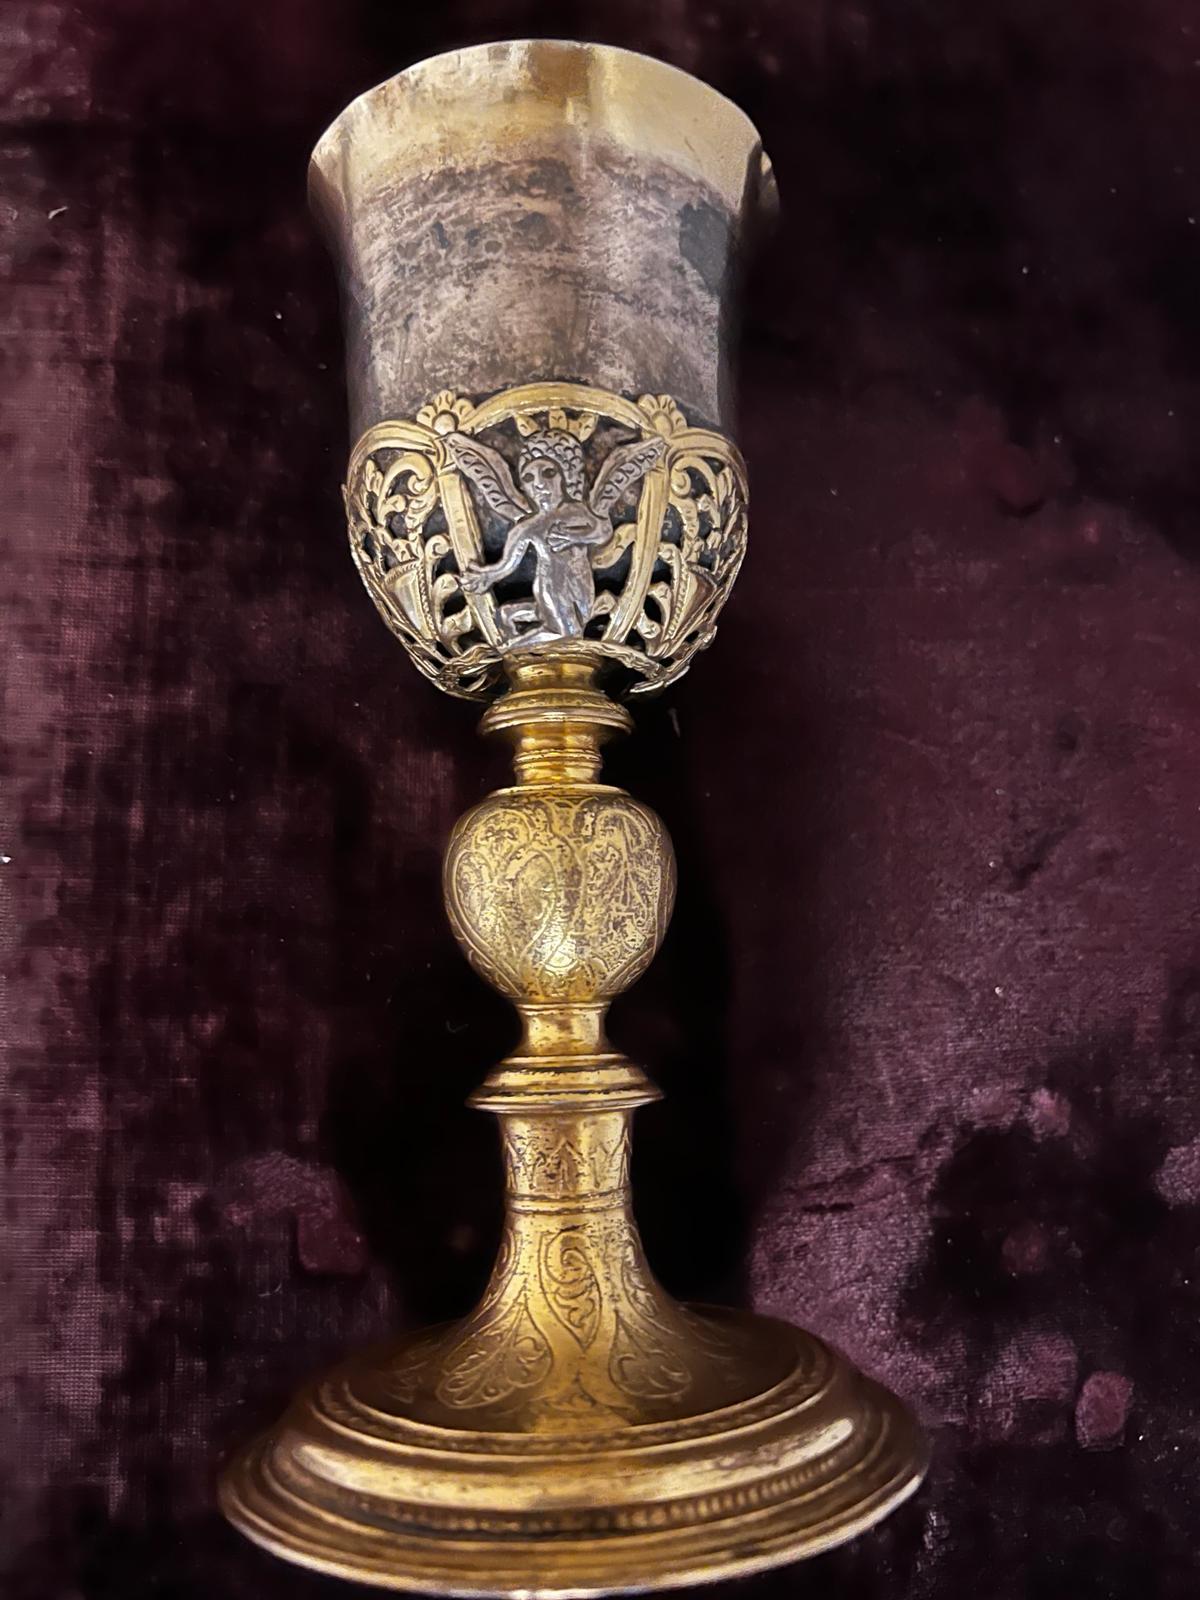 This is an absolutely exquisite rare Cooper-gilt ,silver-gold and three Sterling Silver angels Chalice originated from Augsburg (Germany ) in the 1500. The Goblet is 21cm high, diameter 10 cm and its weight is 420 gr. which is almost one pound!
It